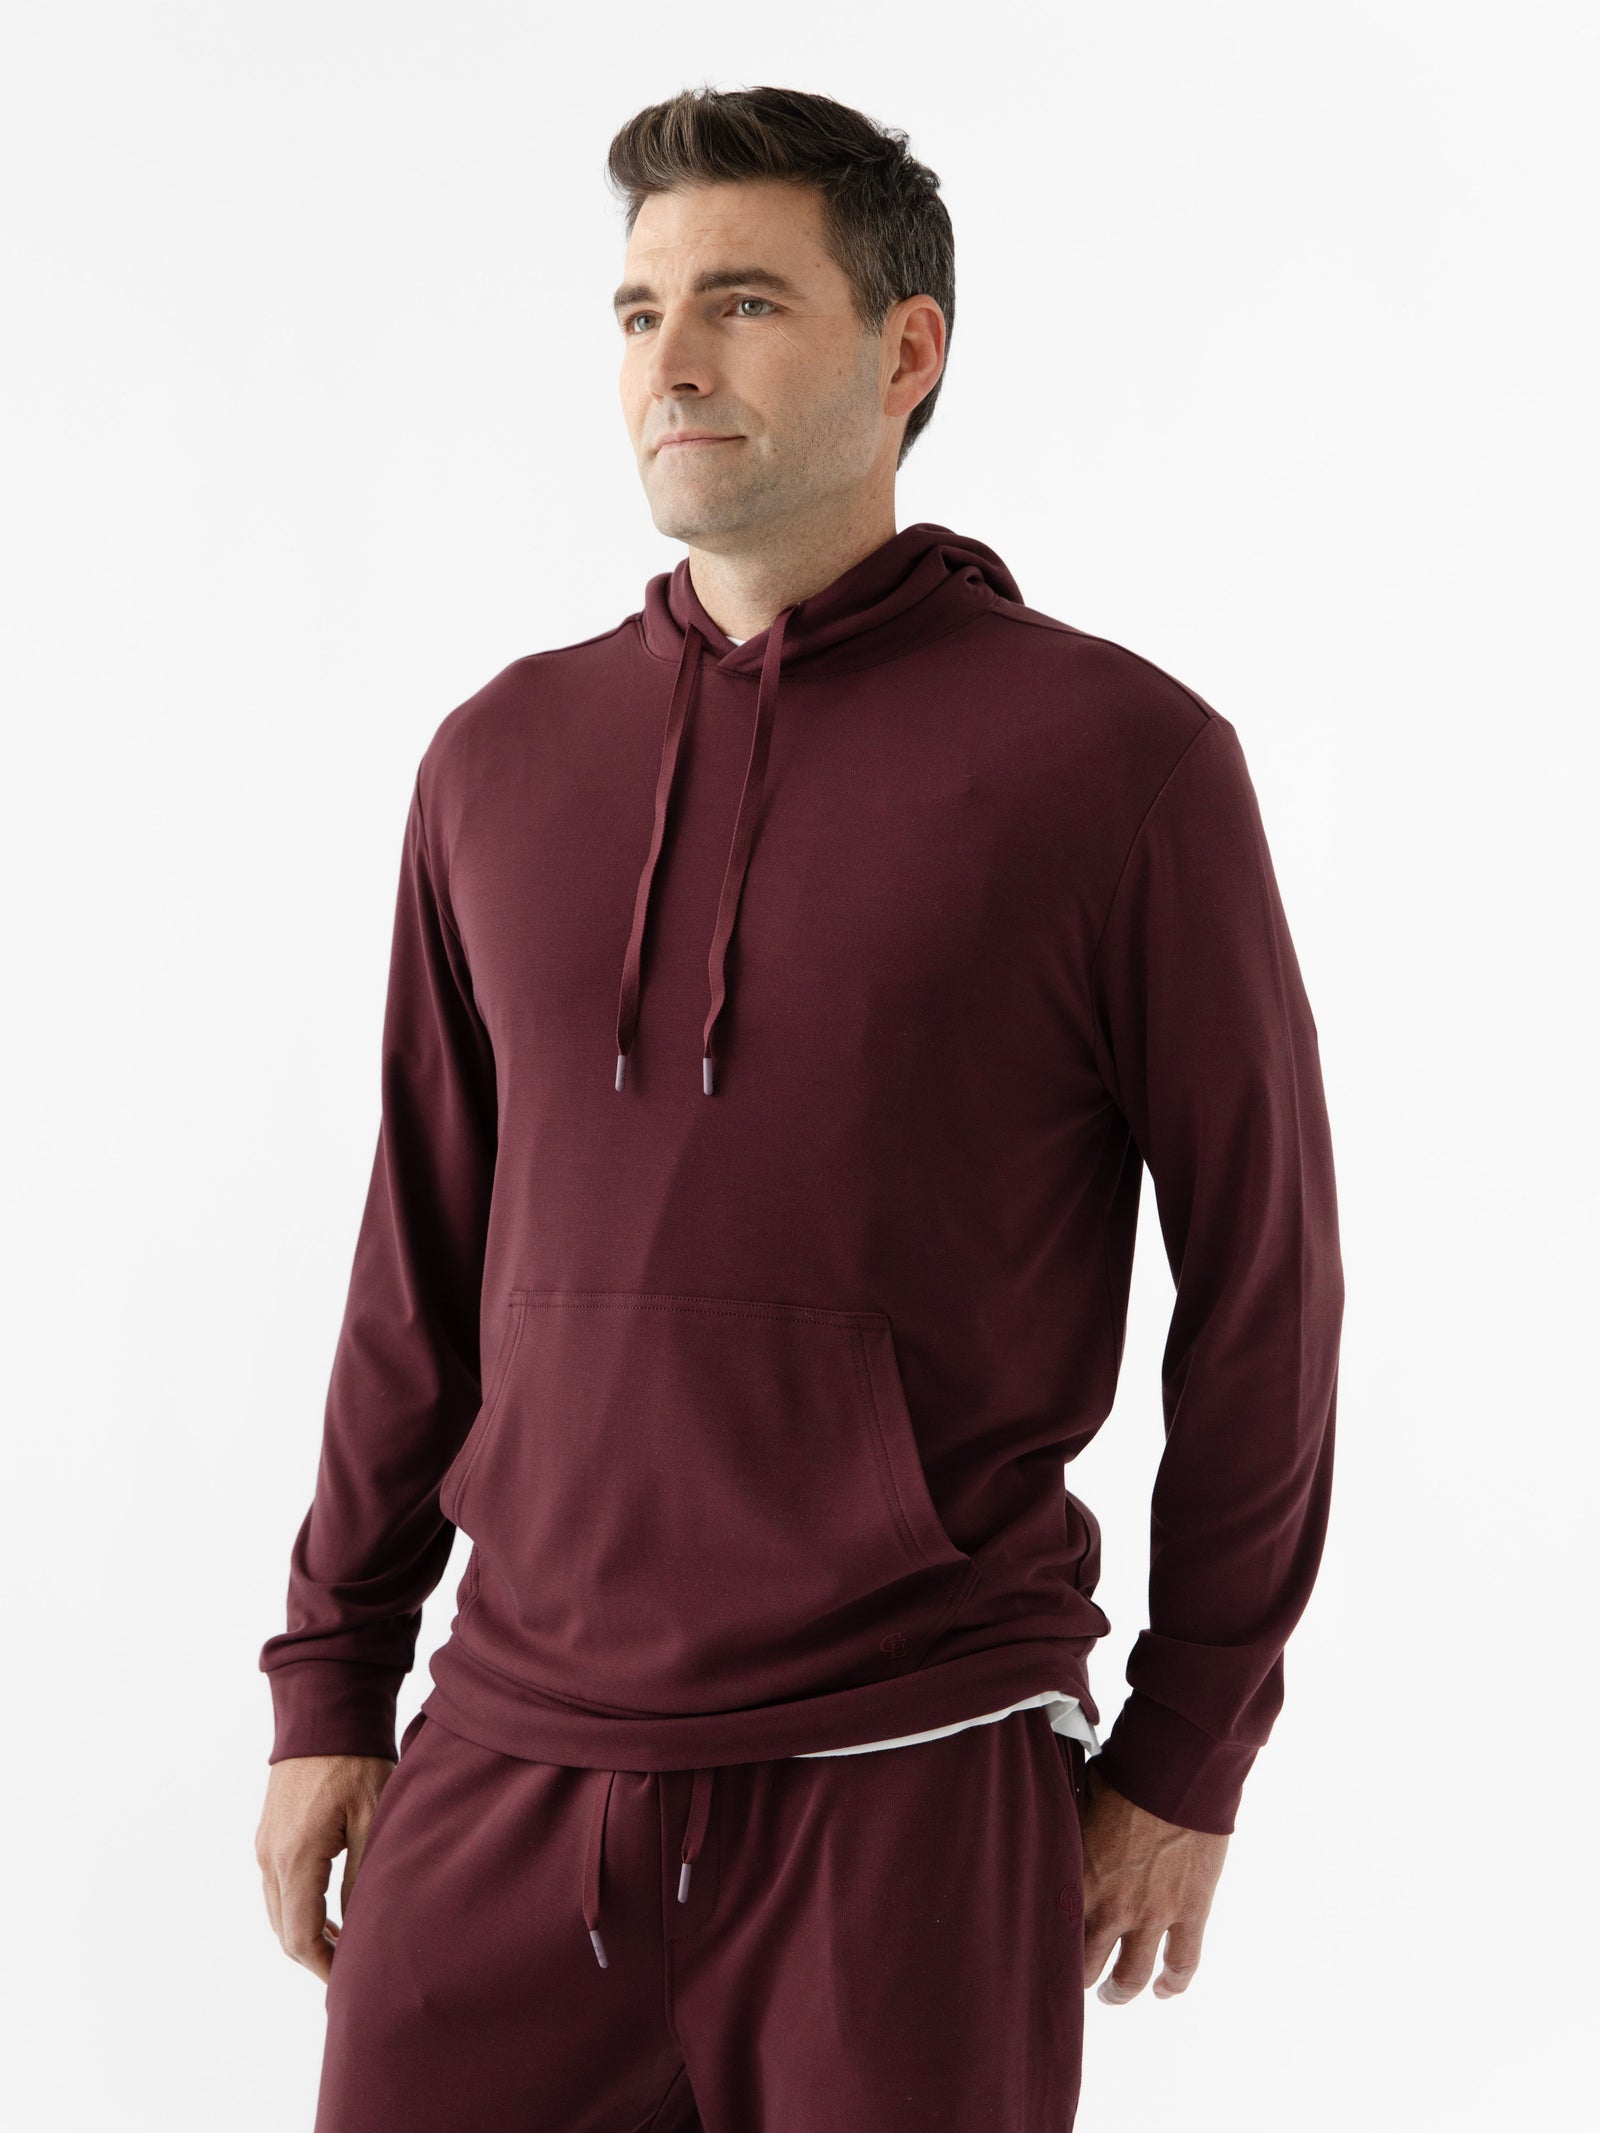 Burgundy Bamboo Hoodie worn by man standing in front of white background.